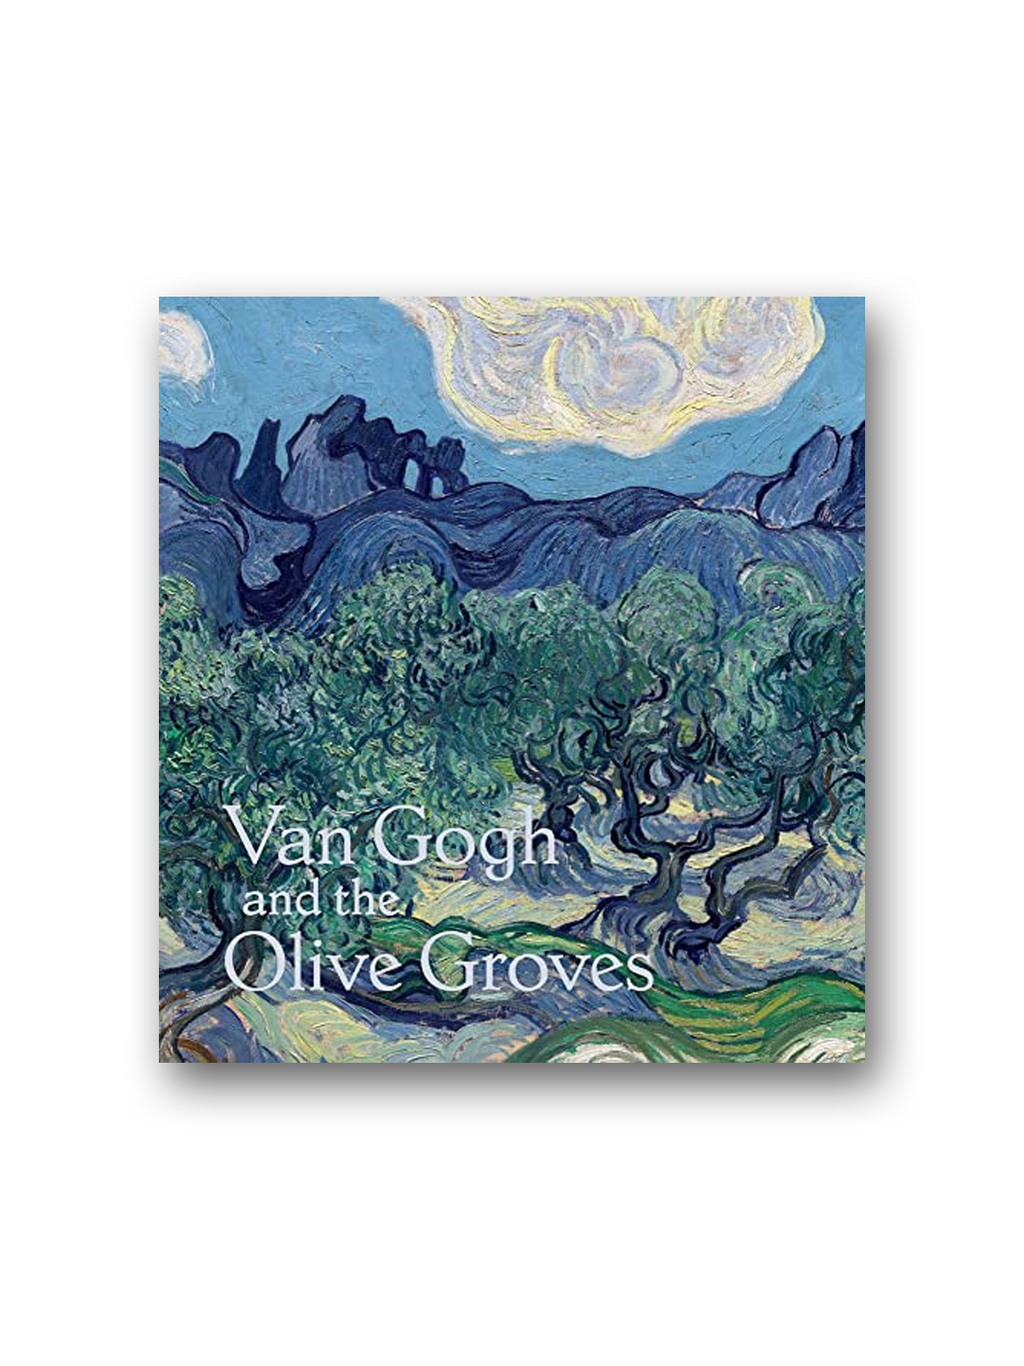 Van Gogh and the Olive Groves